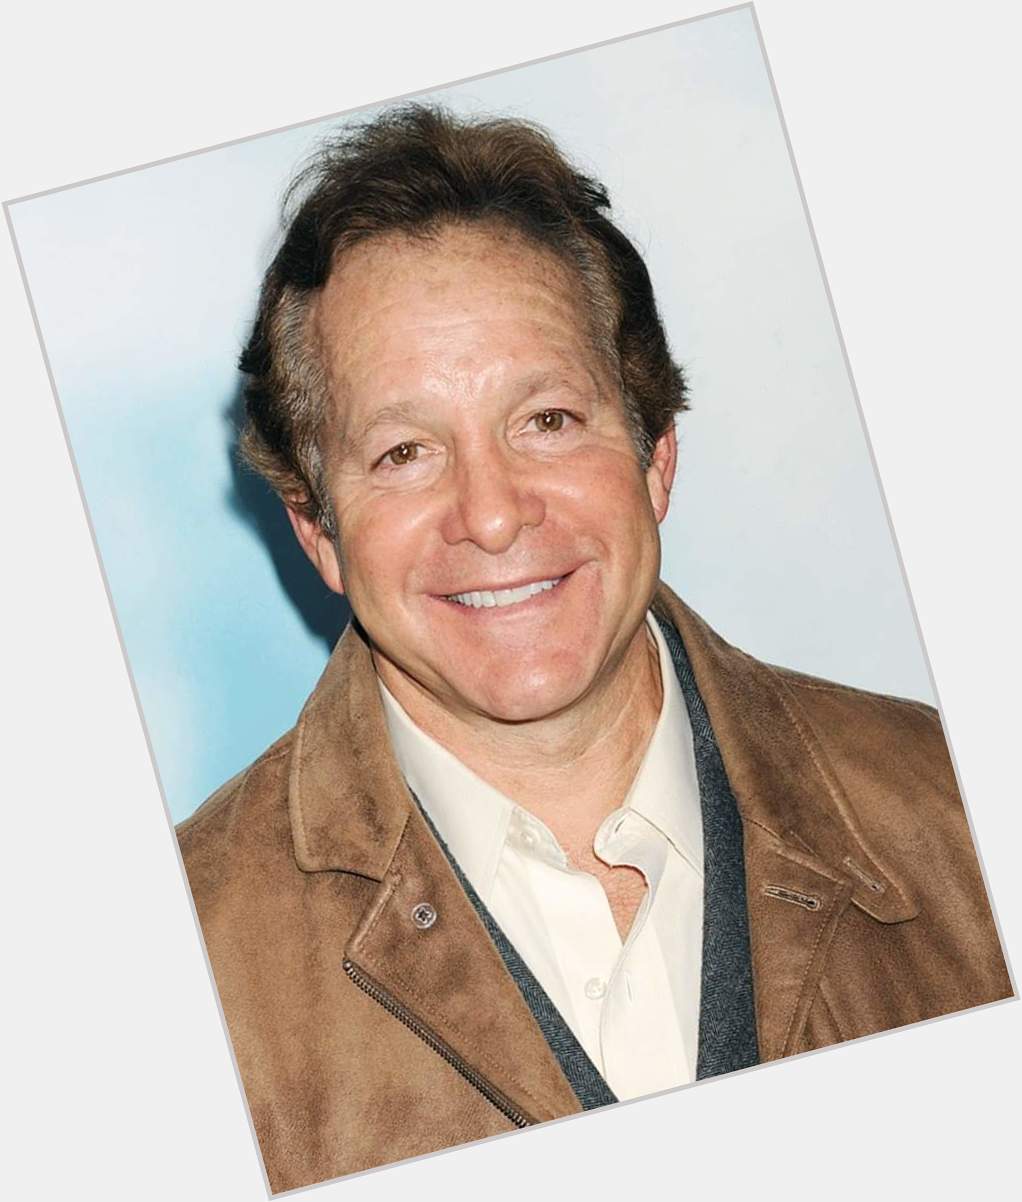 Happy Birthday Steve Guttenberg.  New Age 64. My best Wishes for you  